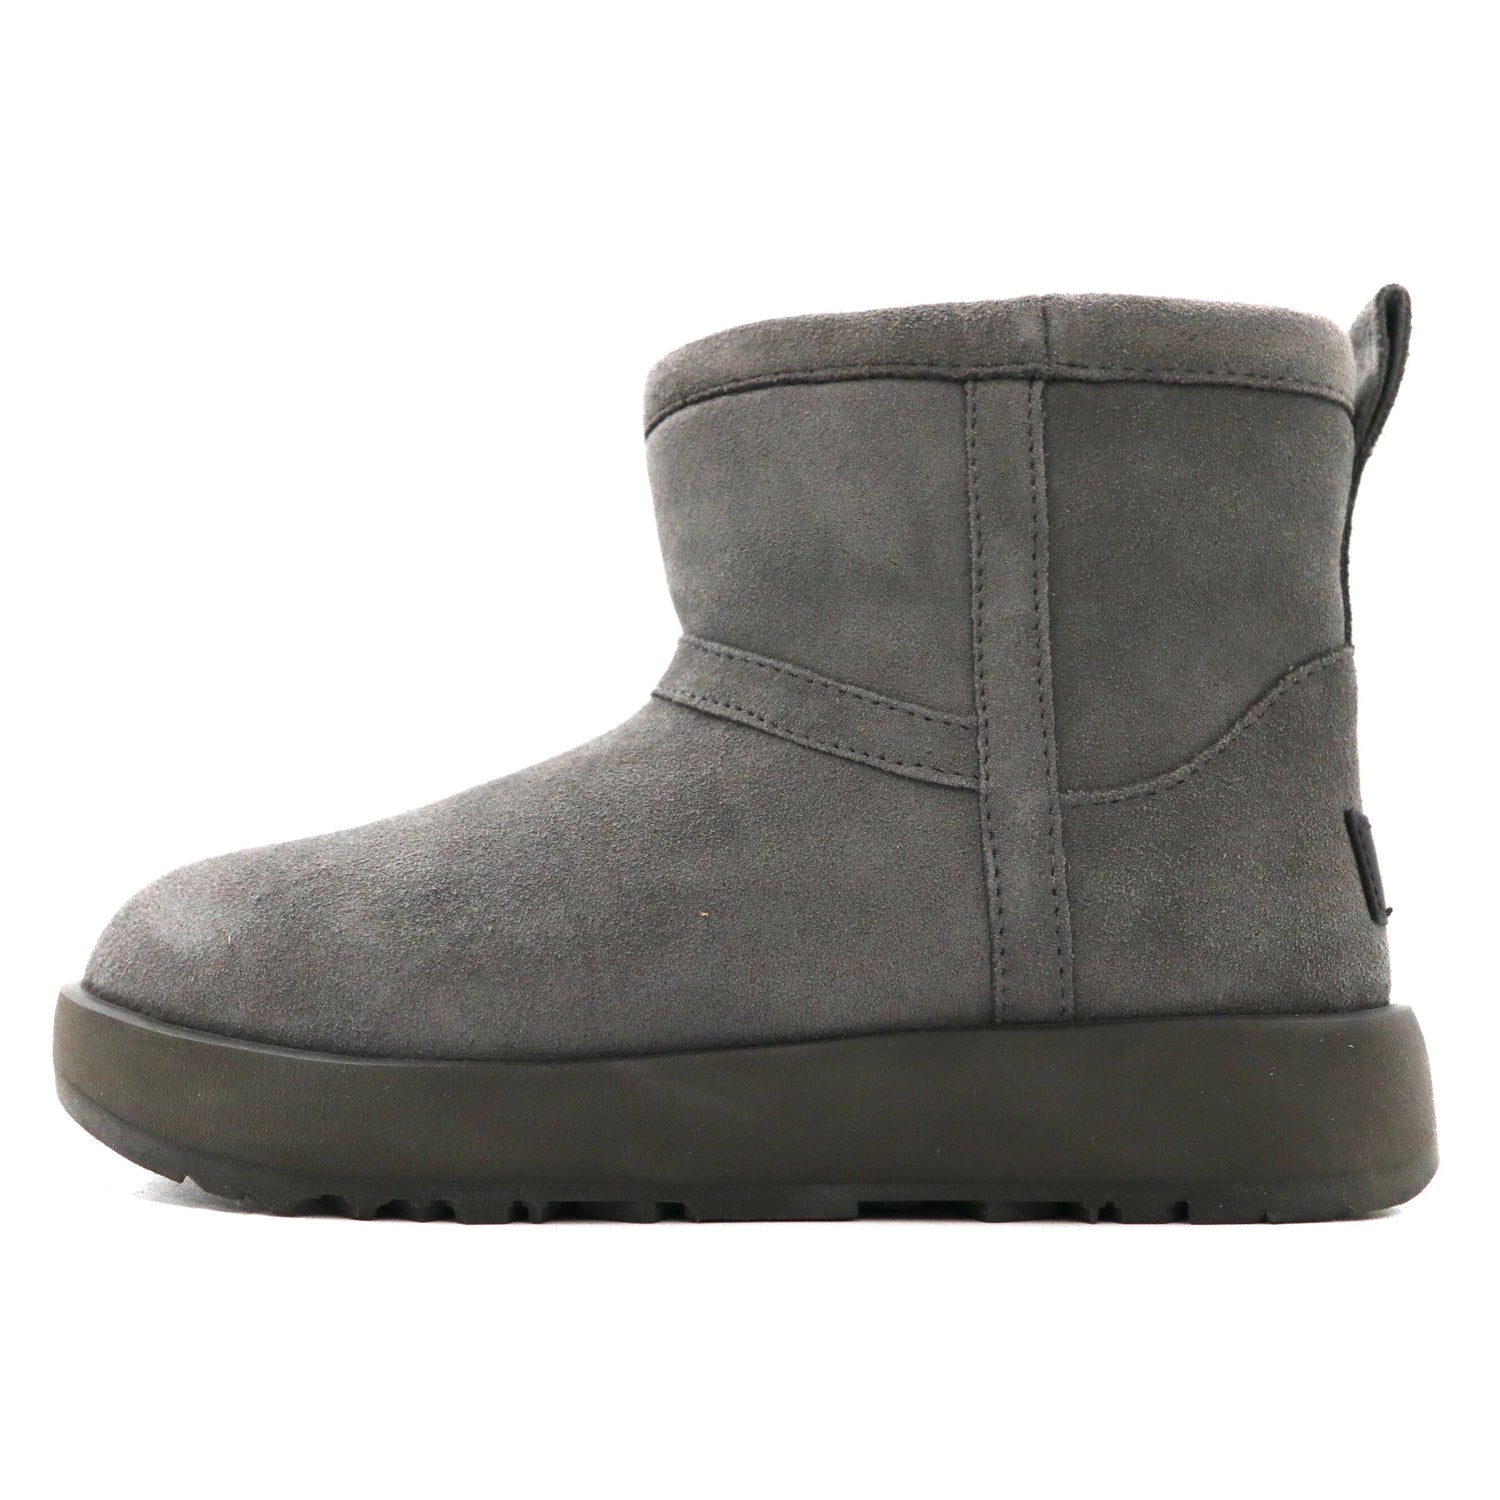 UGG Short Mouton Boots US5 Gray Sheep Leather VIBRAM Sole ...